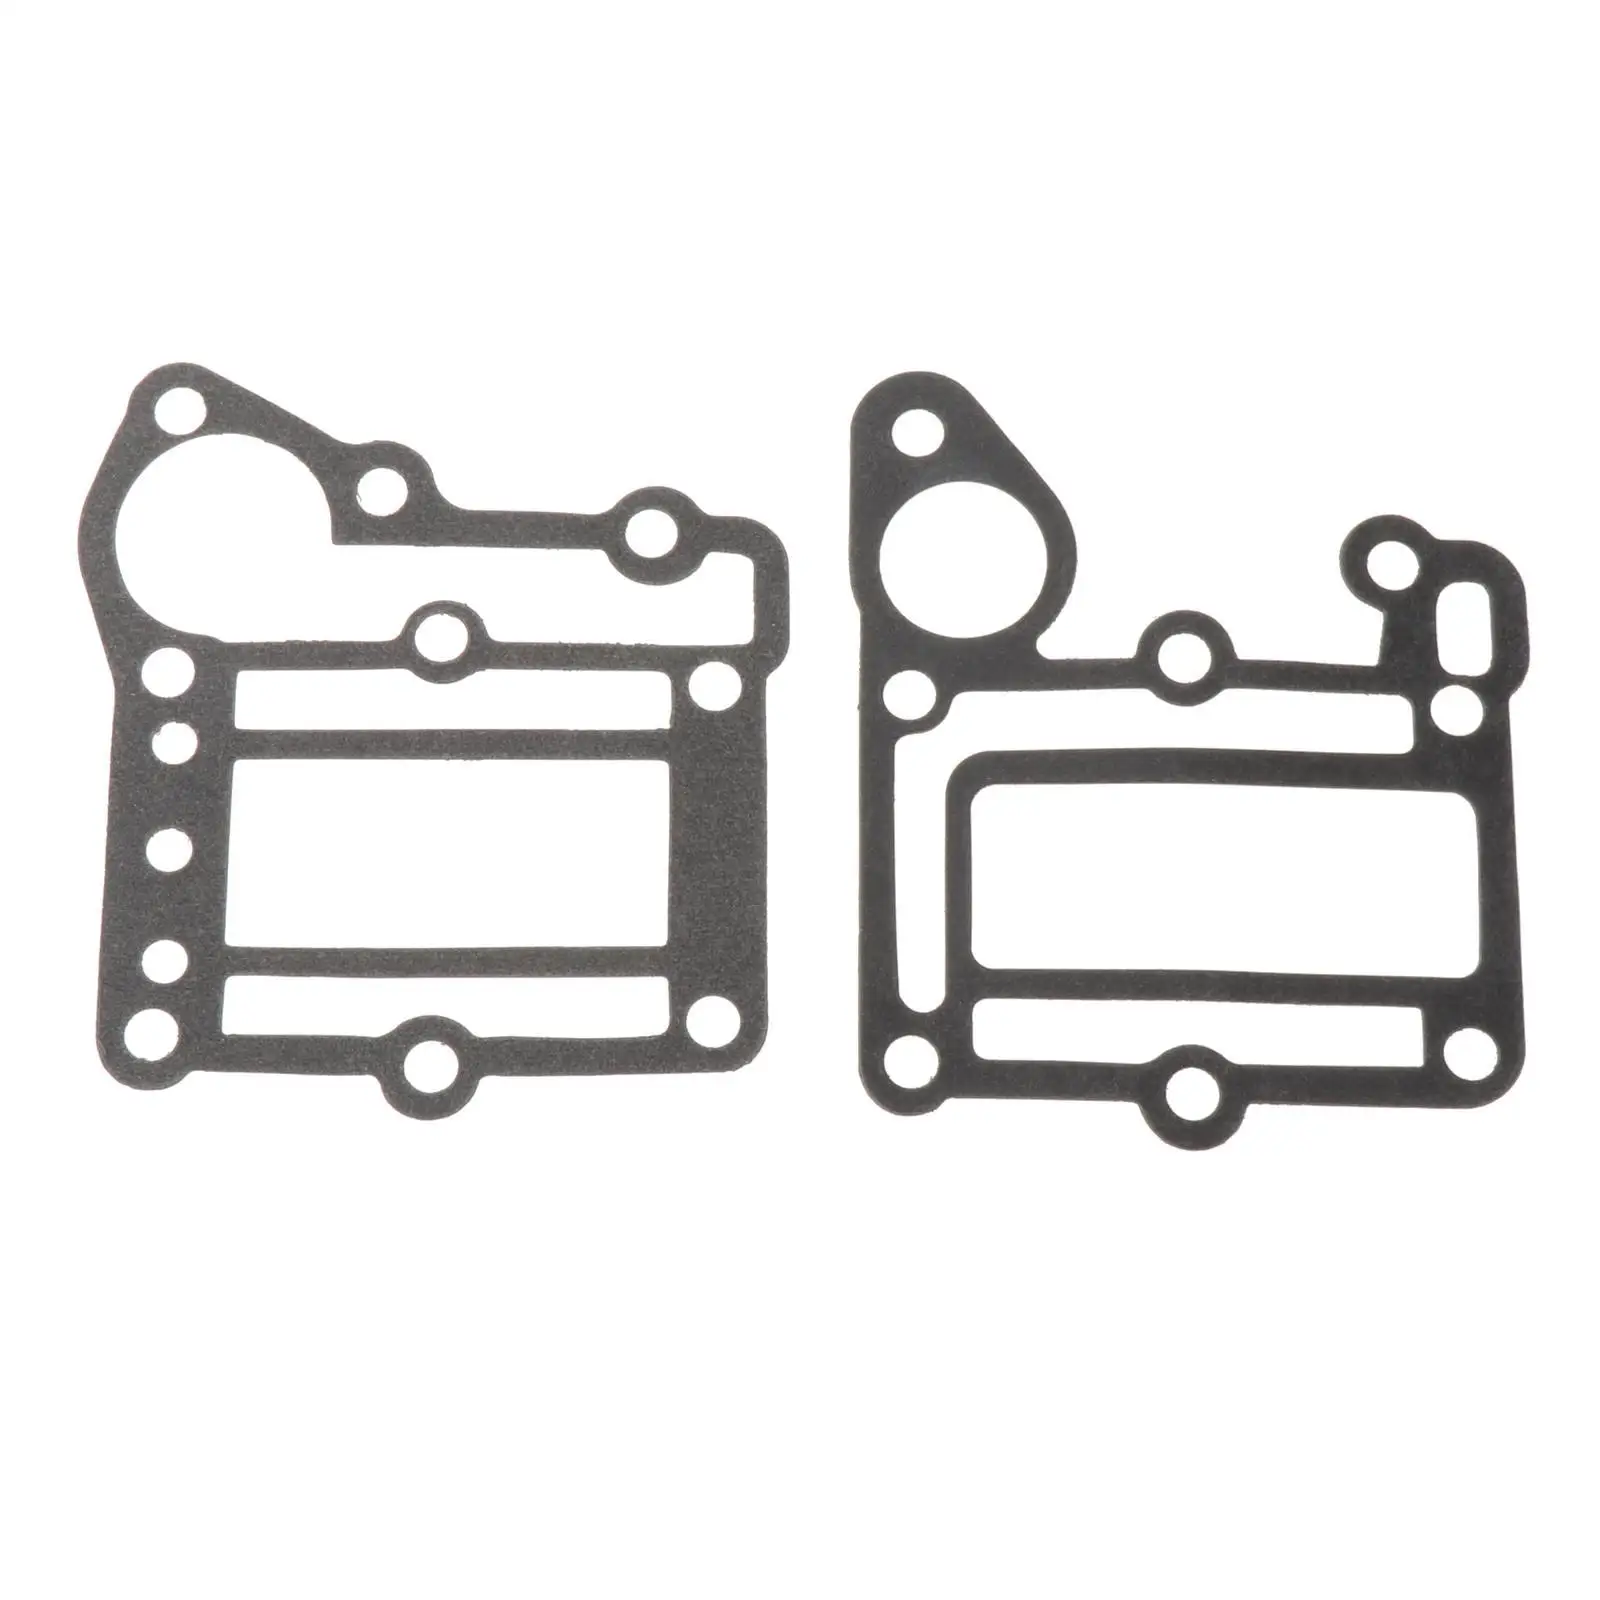 

2x Exhaust Jacket Gasket Kit 6E0-41112-A0 6E0-41114-A0 Exhaust Inner Cover Gasket Fits for 2T 4HP 6E0 Model Outboard Motors